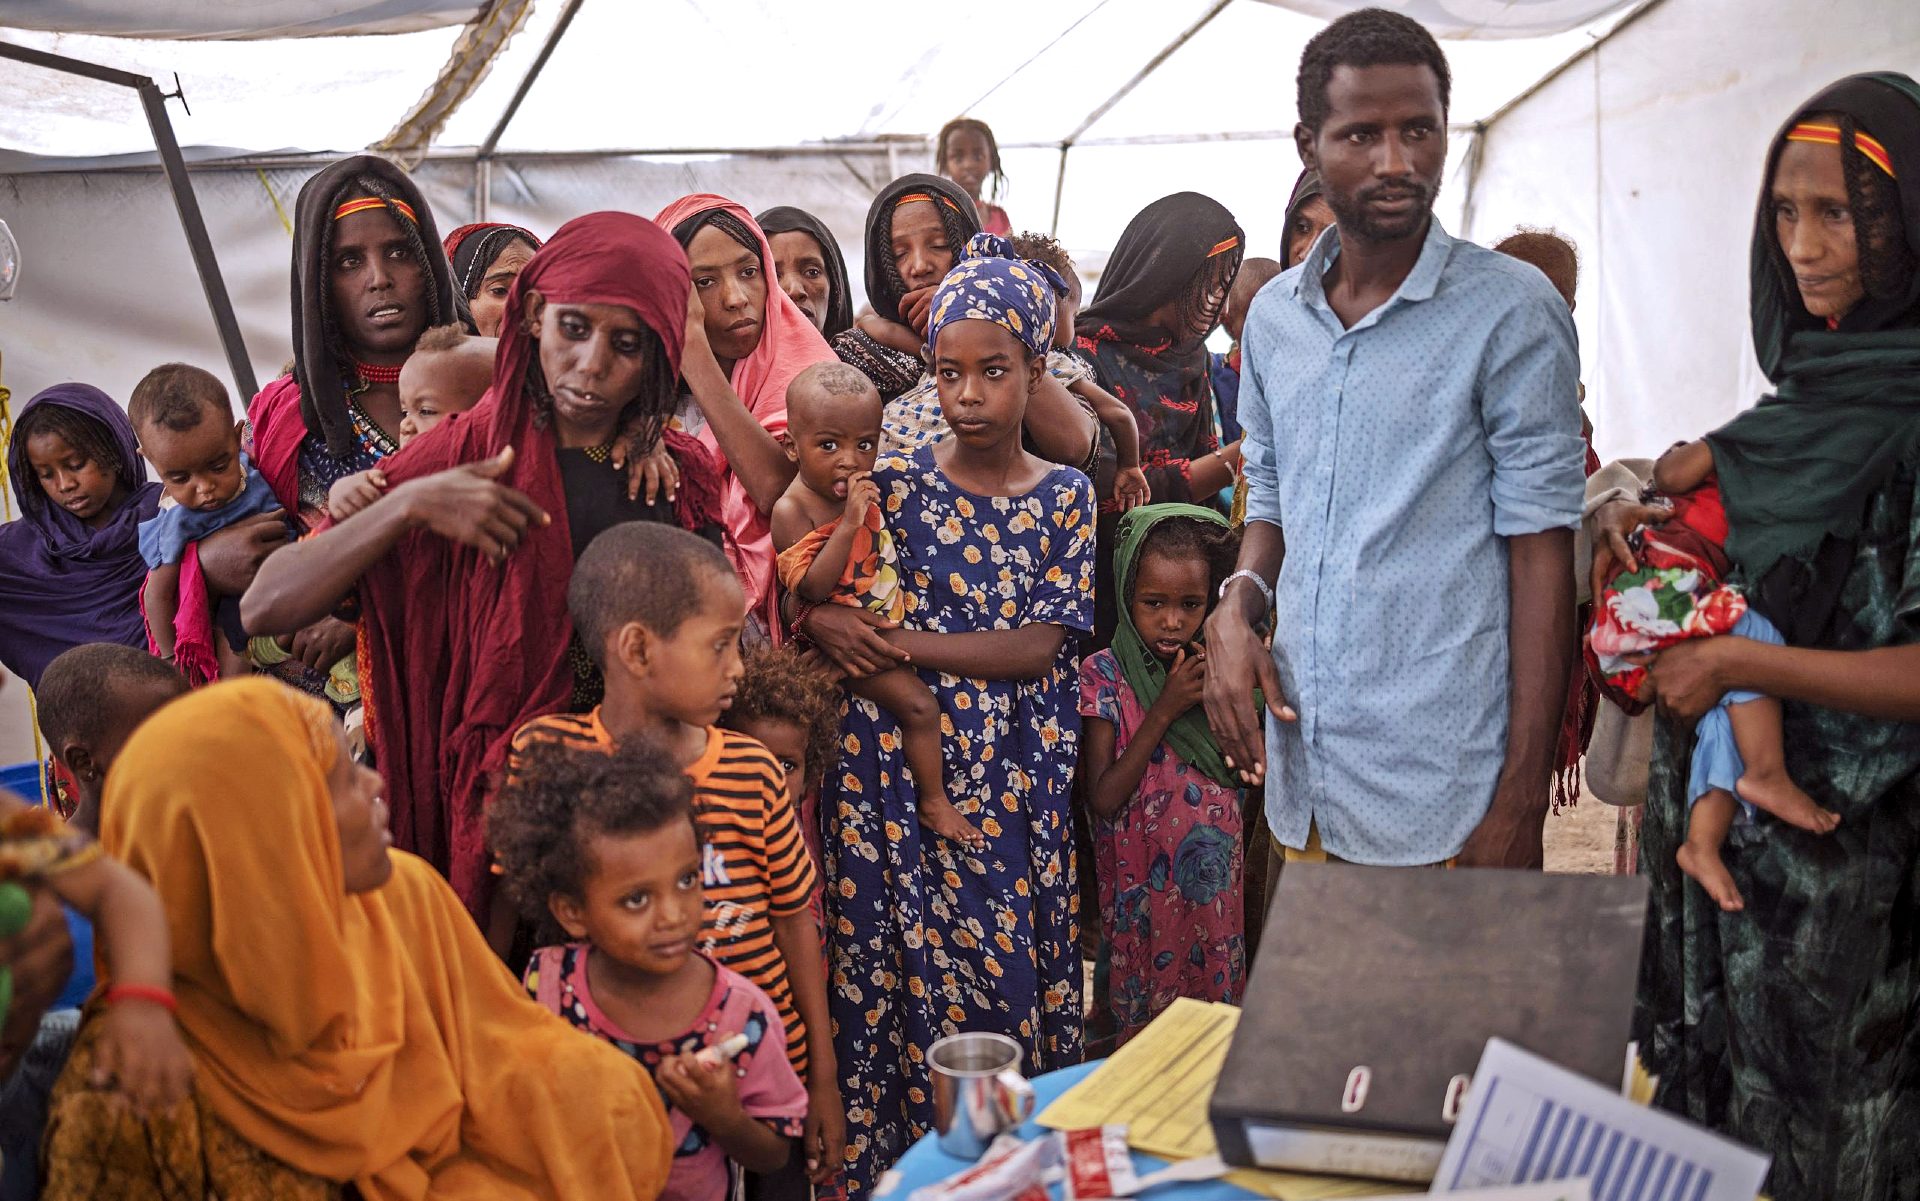 Women and children from the internally displaced persons camp of Guyah, Ethiopia wait to have their children screened by health personnel. (Photo: Michele Spatari/AFP)